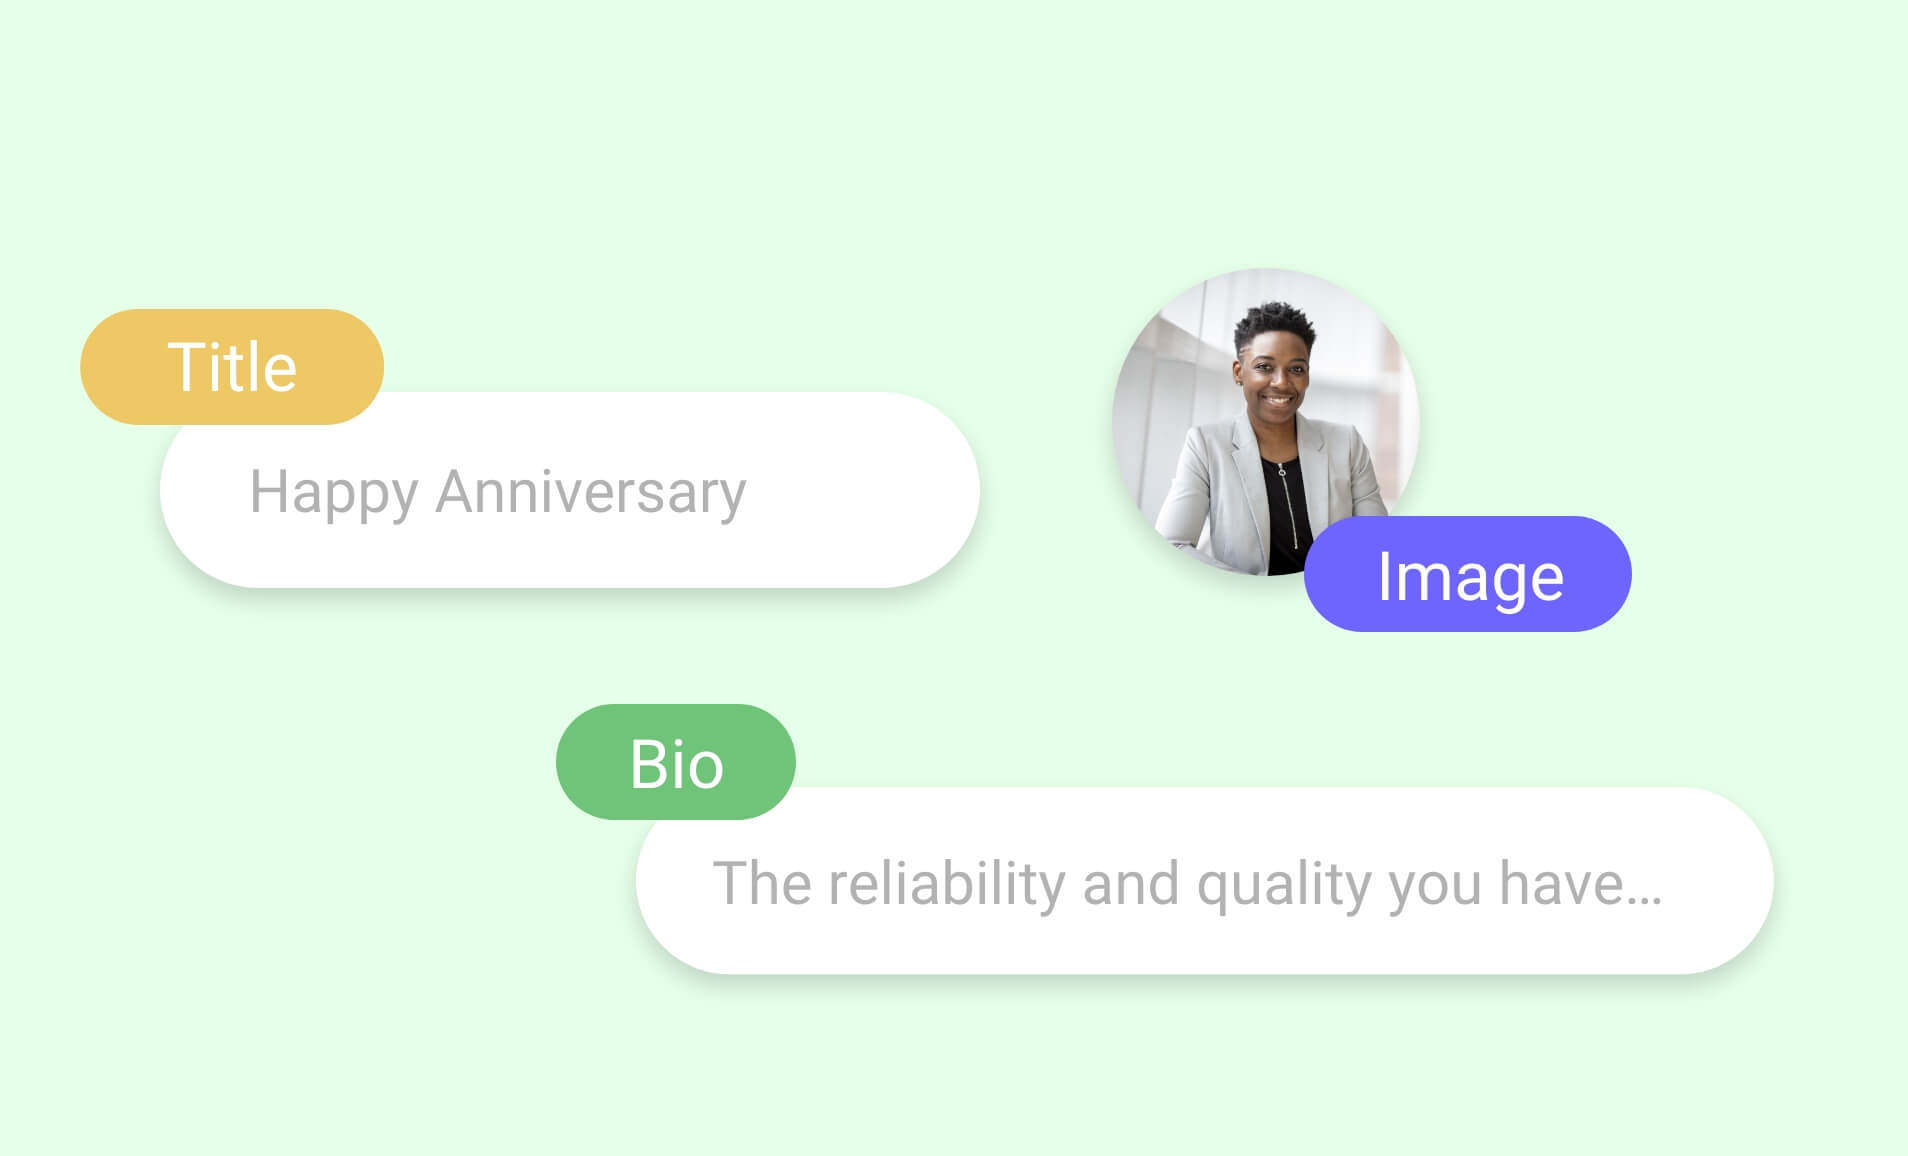 People Space App having options to edit Title, Image and Bio to display on Digital Screen